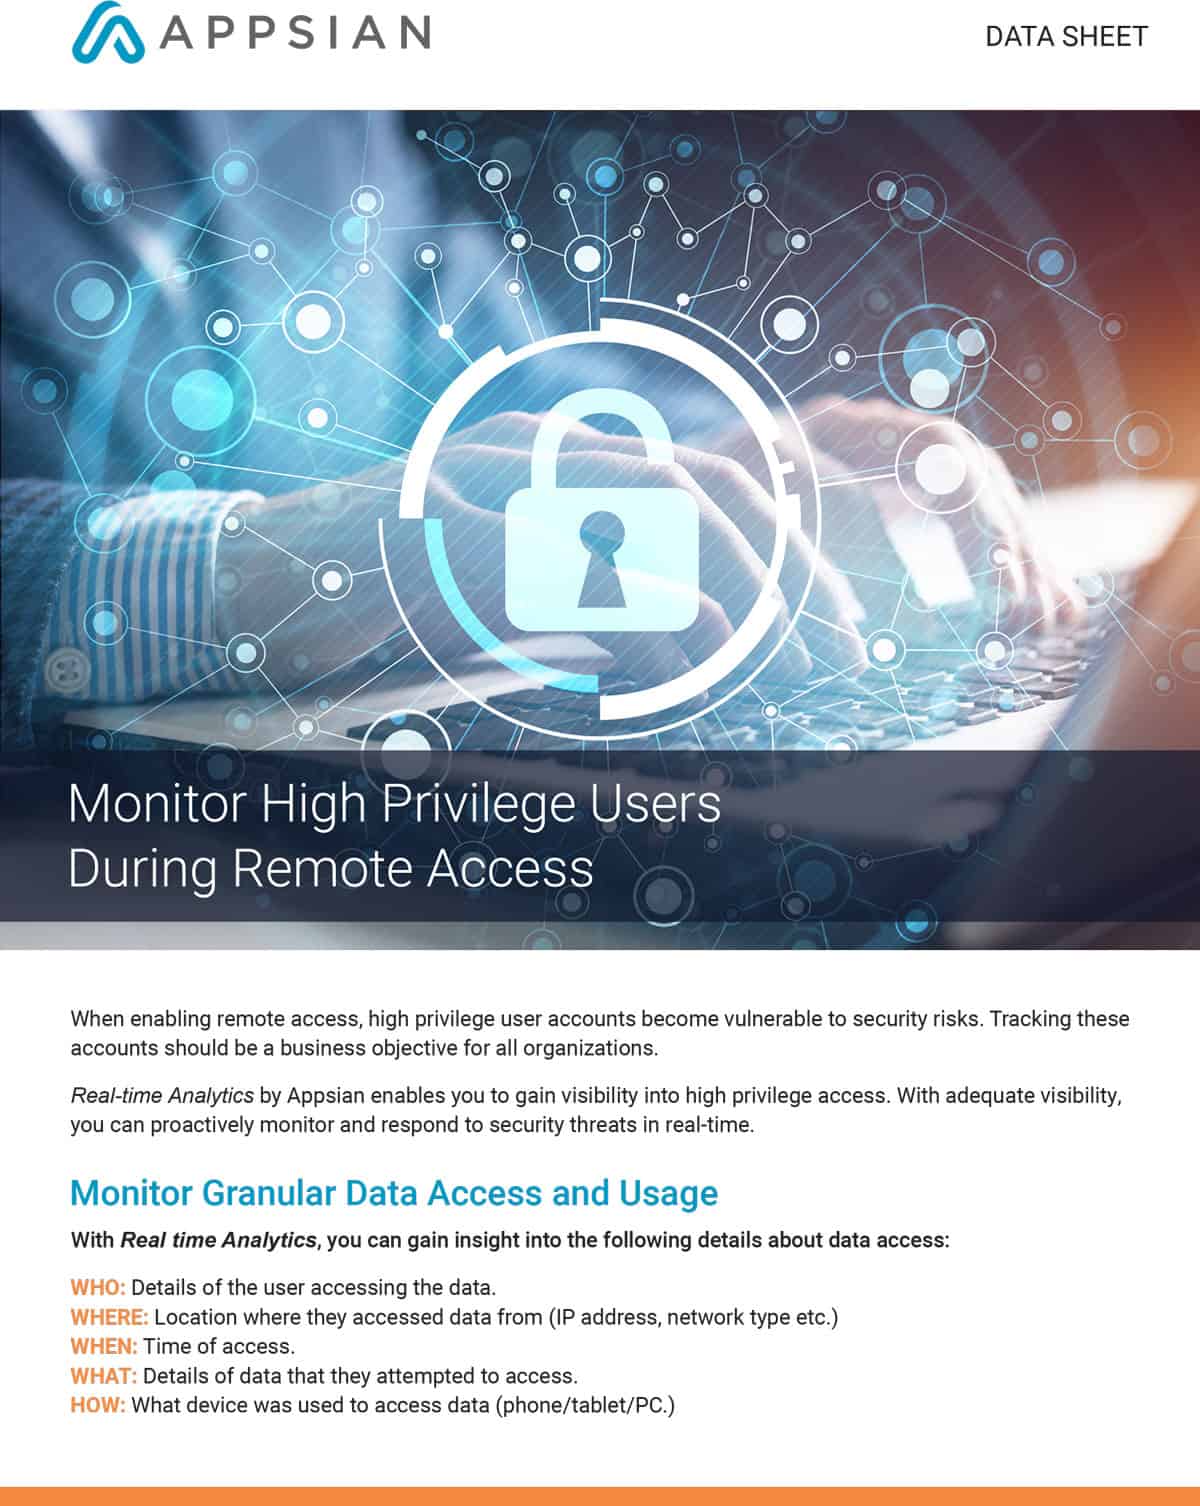 Monitor High Privilege Users During Remote Access